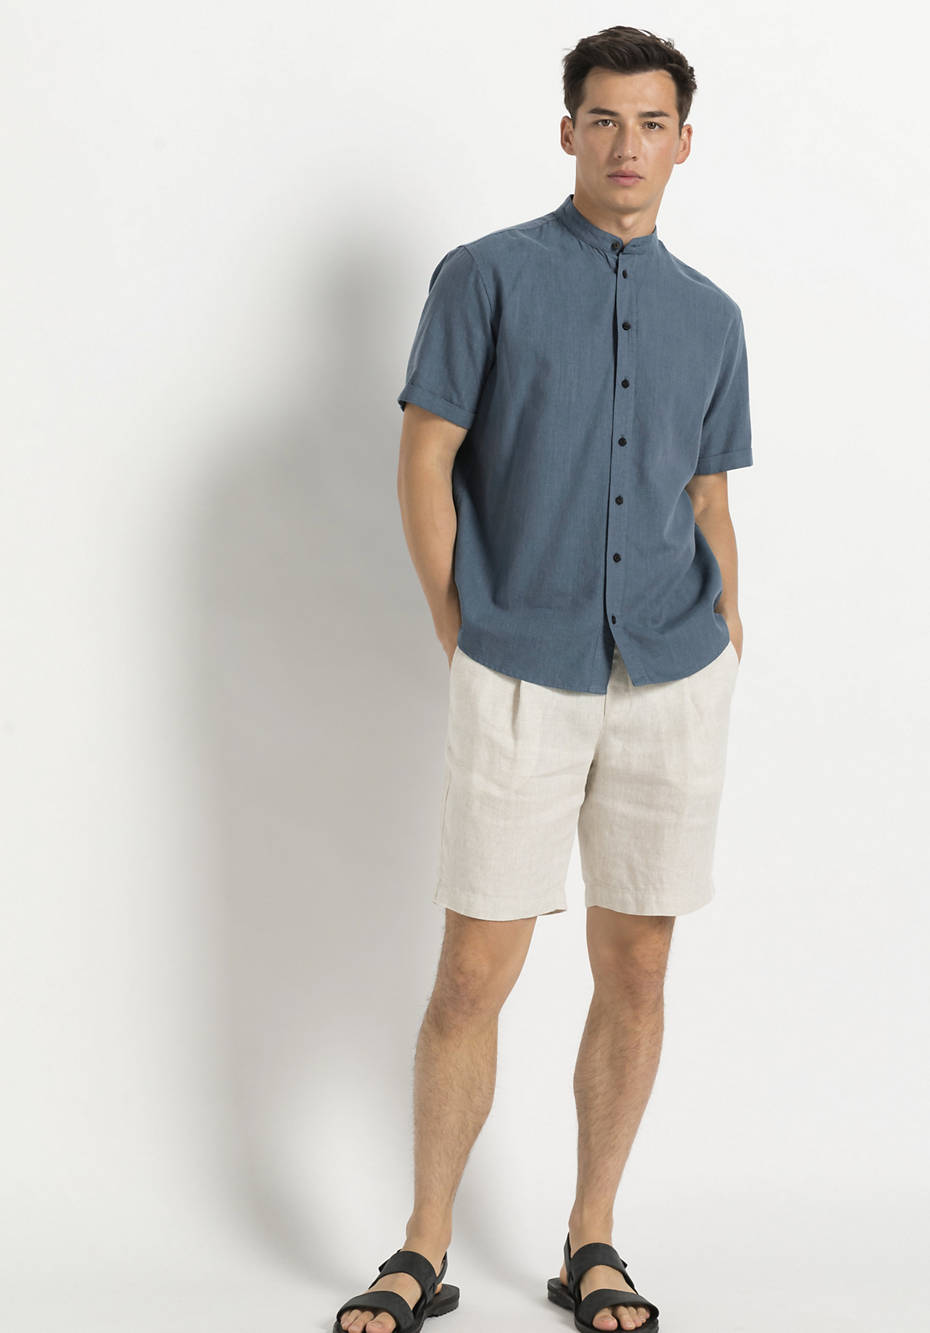 Short-sleeved shirt Comfort Fit made of hemp with organic cotton